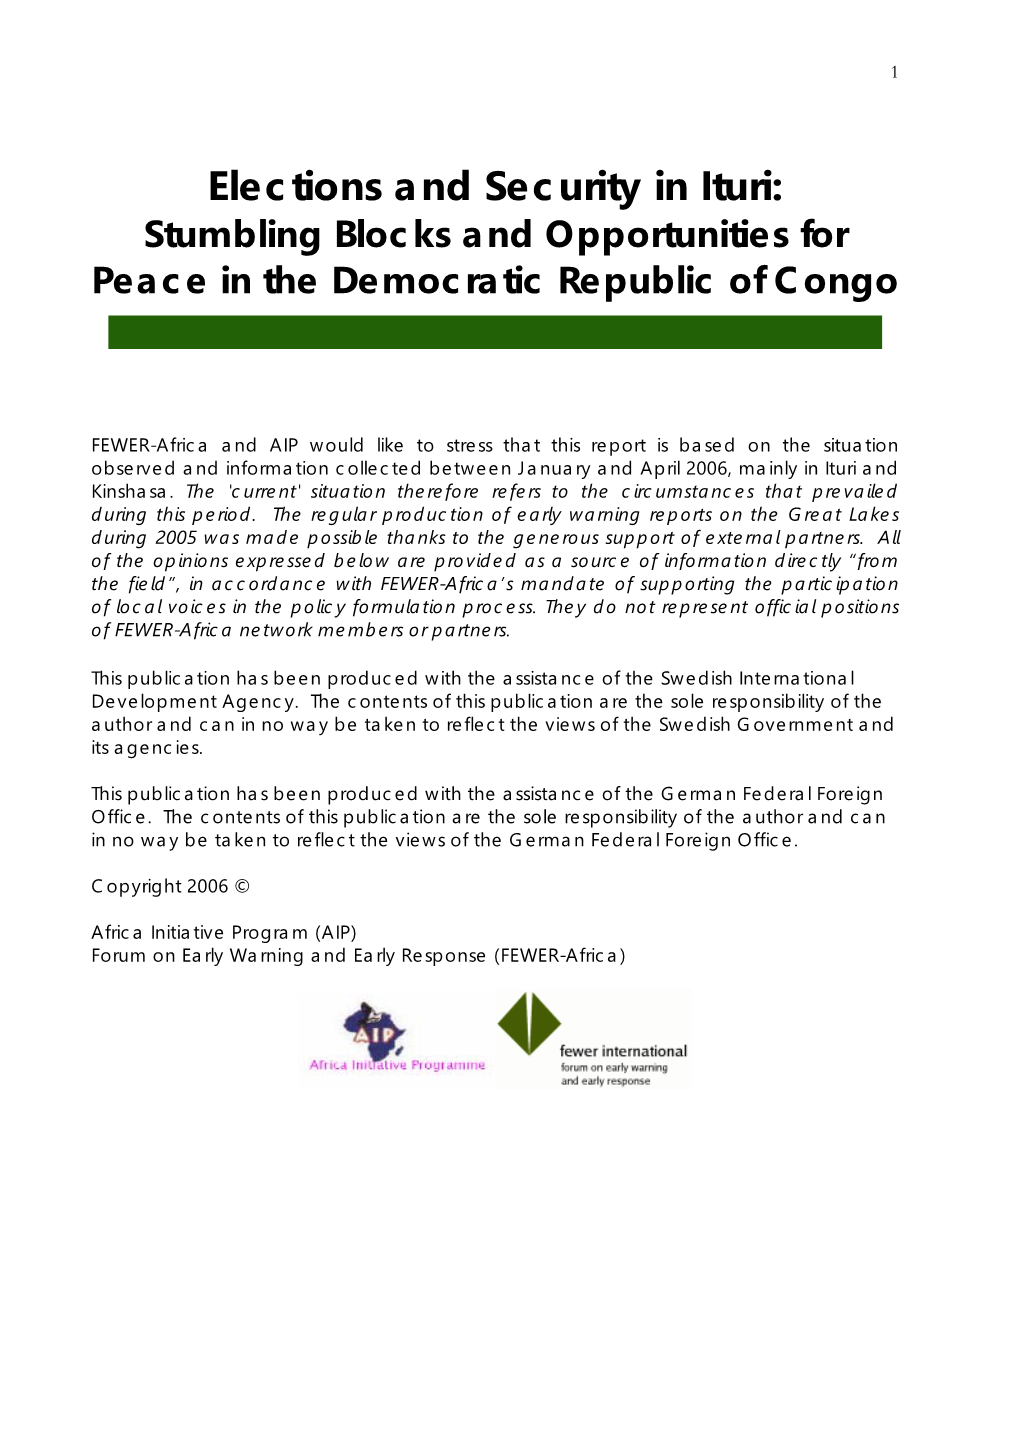 Elections and Security in Ituri: Stumbling Blocks and Opportunities for Peace in the Democratic Republic of Congo